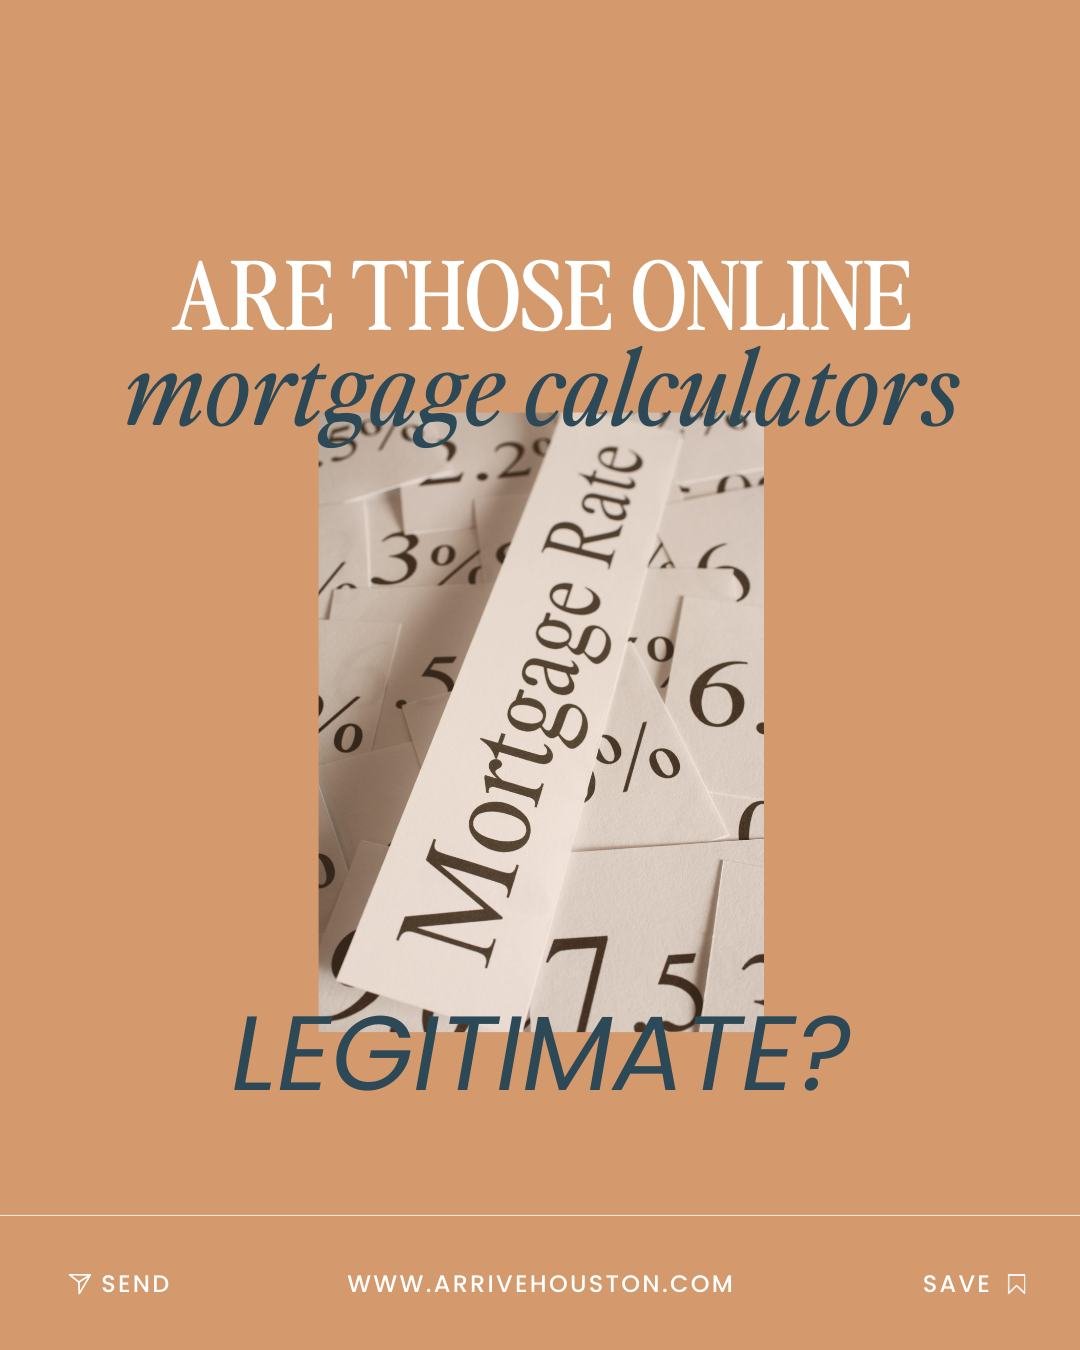 Legit or not?
Before you take what online mortgage calculators say to the bank, know this:
Interest rates are incredibly personalized. One size *does not* fit all. 
What you end up with as your lender-issued rate is based on things like: 
Your debt-t